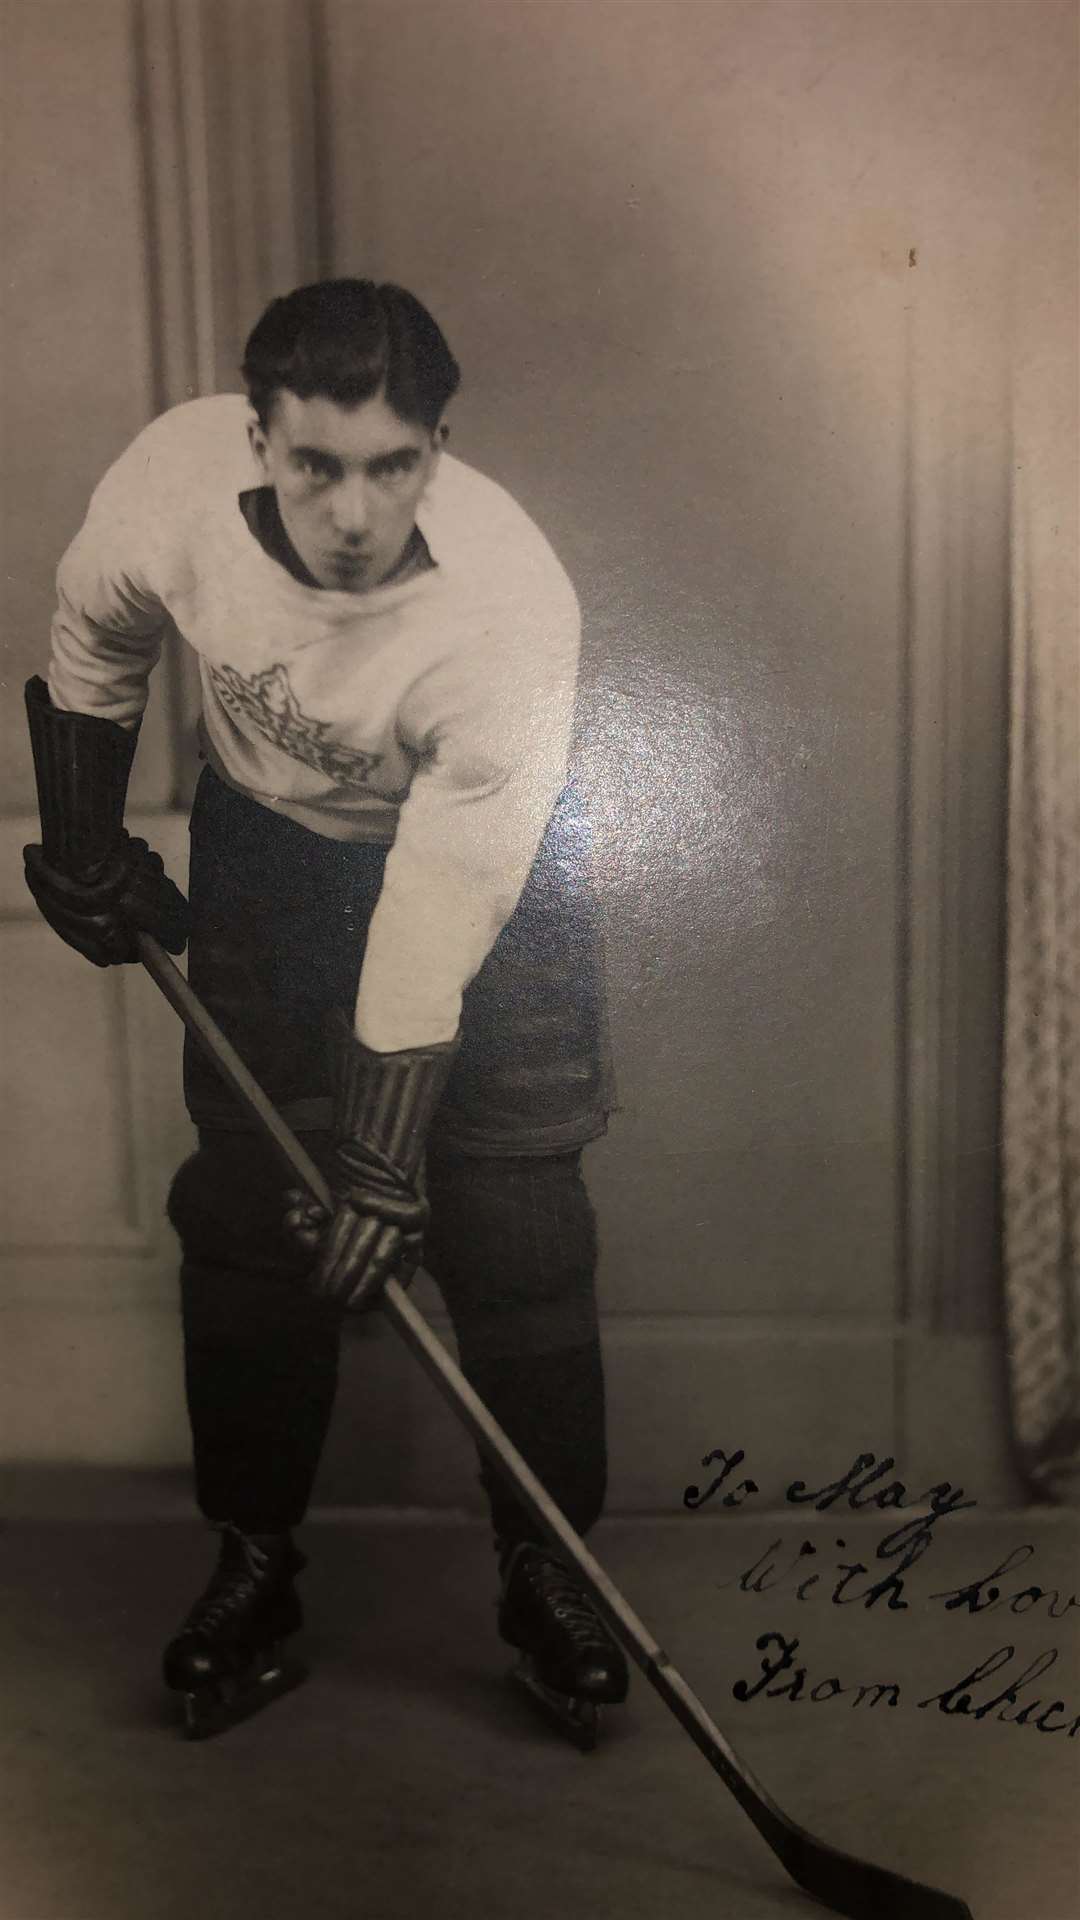 A young Chic Baxter in his ice hockey playing days.